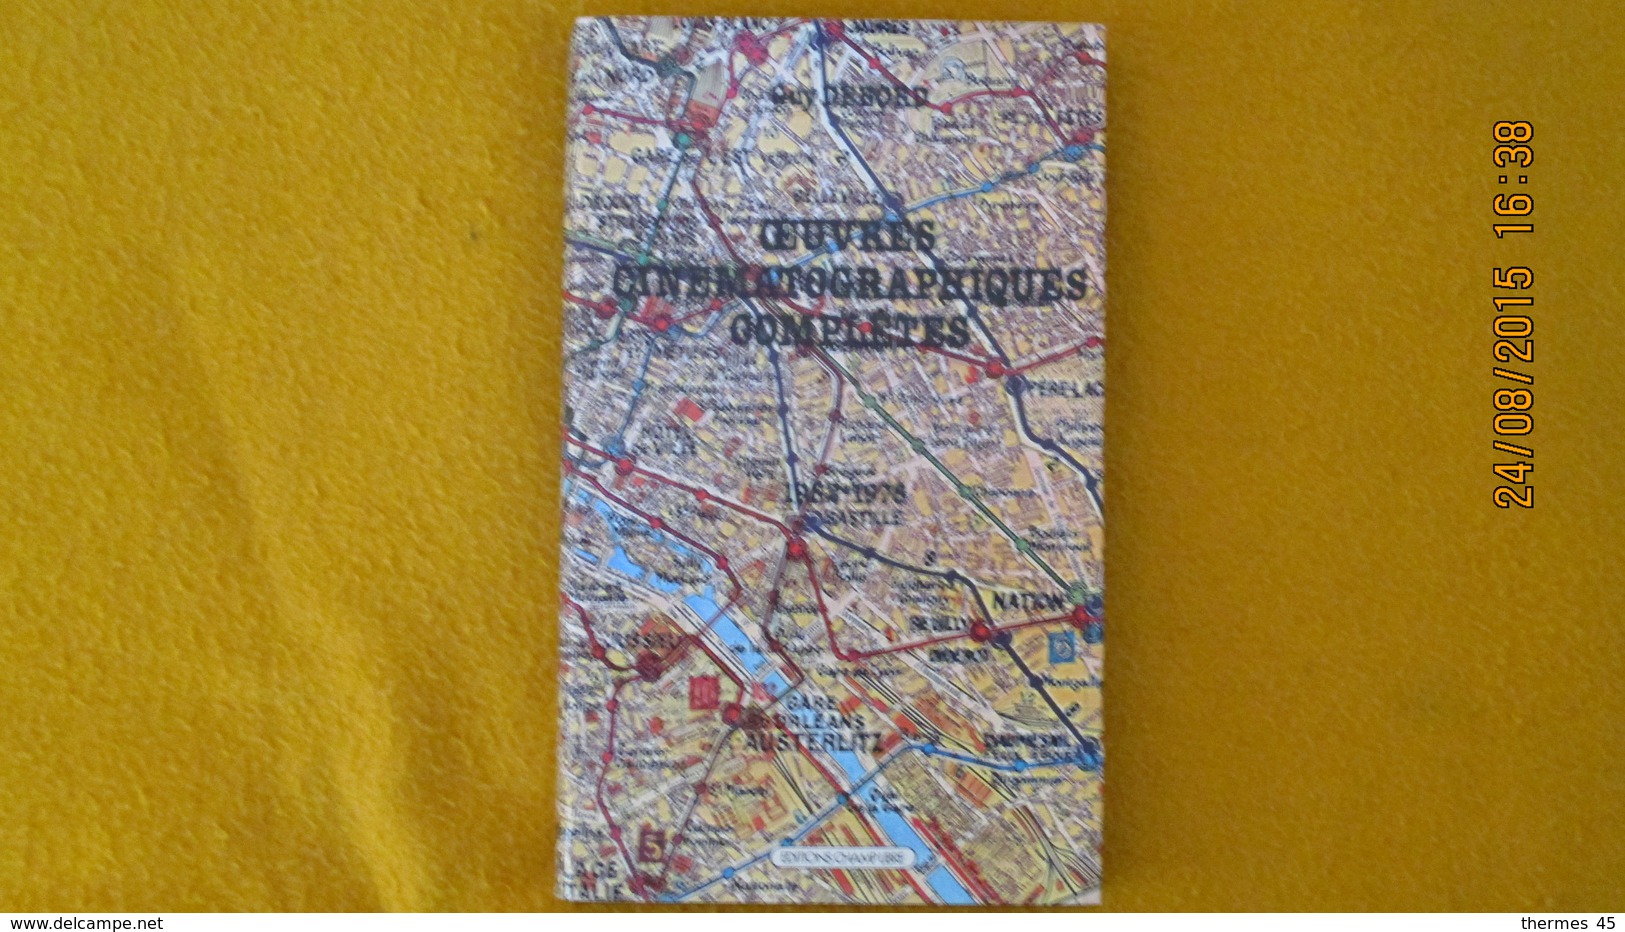 GUY DEBORD / OEUVRES CINEMATOGRAPHIQUES COMPLETES / 1952-1978 / 1ère EDITION / ED. CHAMP LIBRE. - Cinema/Televisione